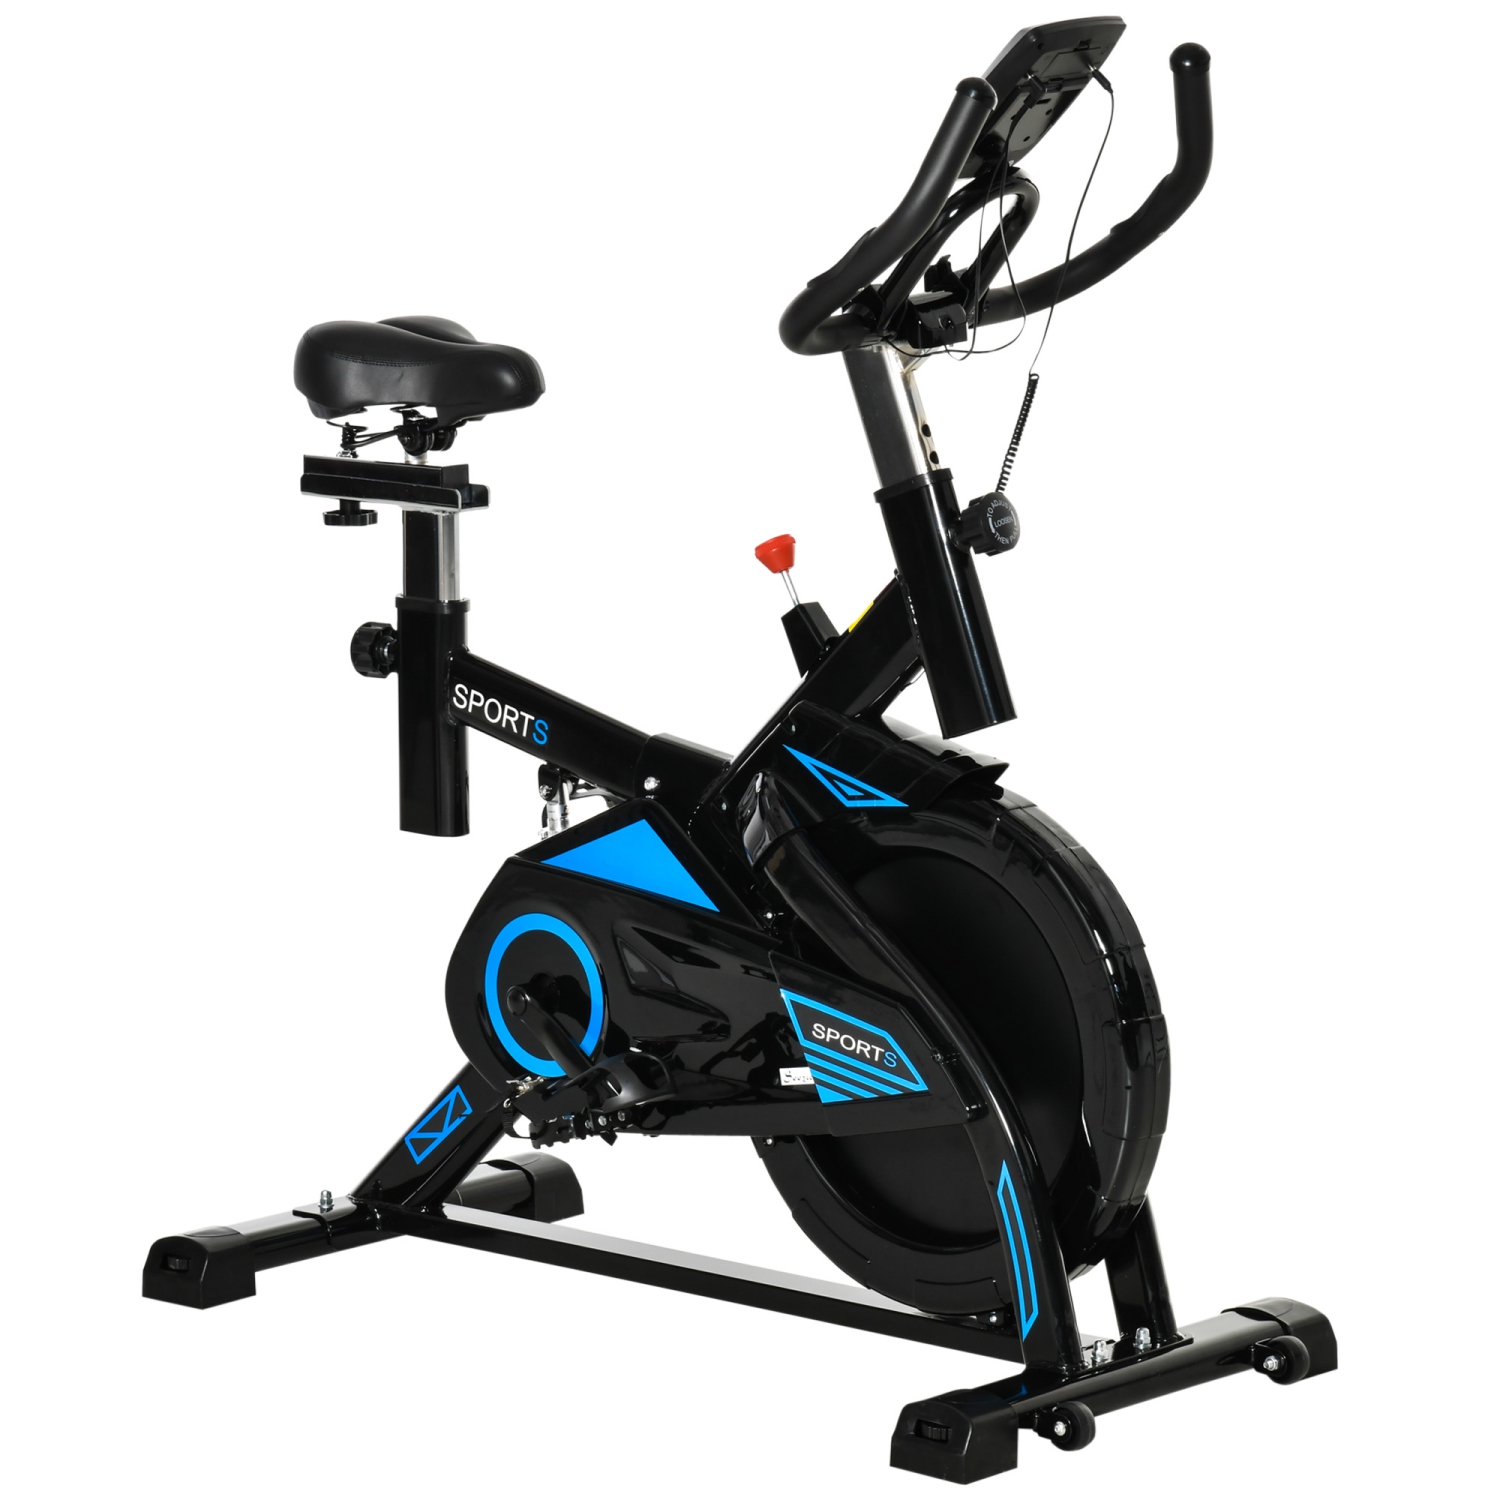 Soozier Stationary Exercise Bike Indoor Cardio Workout Cycling Bicycle w/ Heart Pulse Sensor & LCD Monitor 28.6lb Flywheel Adjustable Resistance